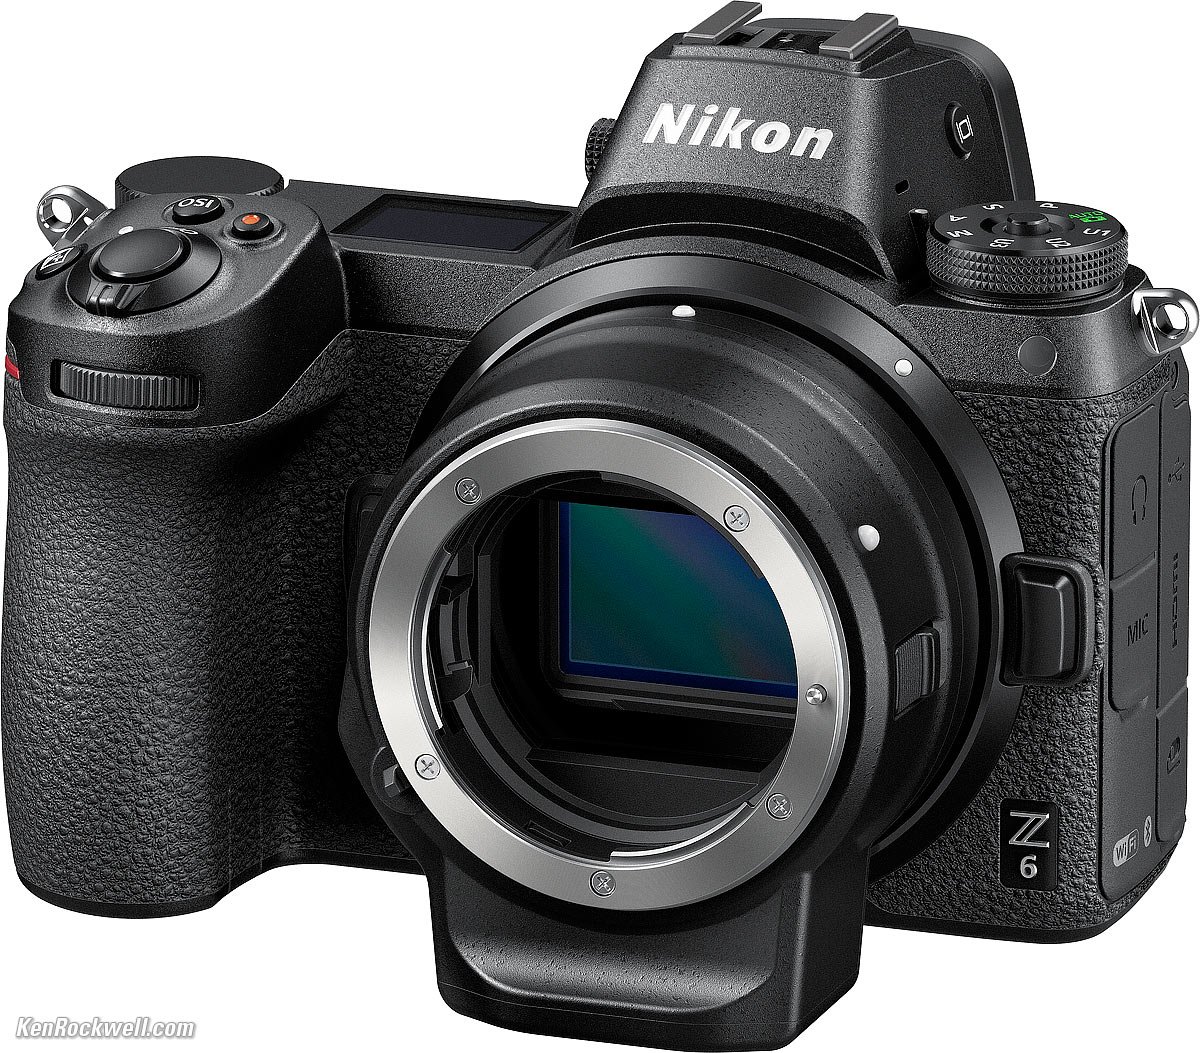 Can you use a dslr lens on a mirrorless camera